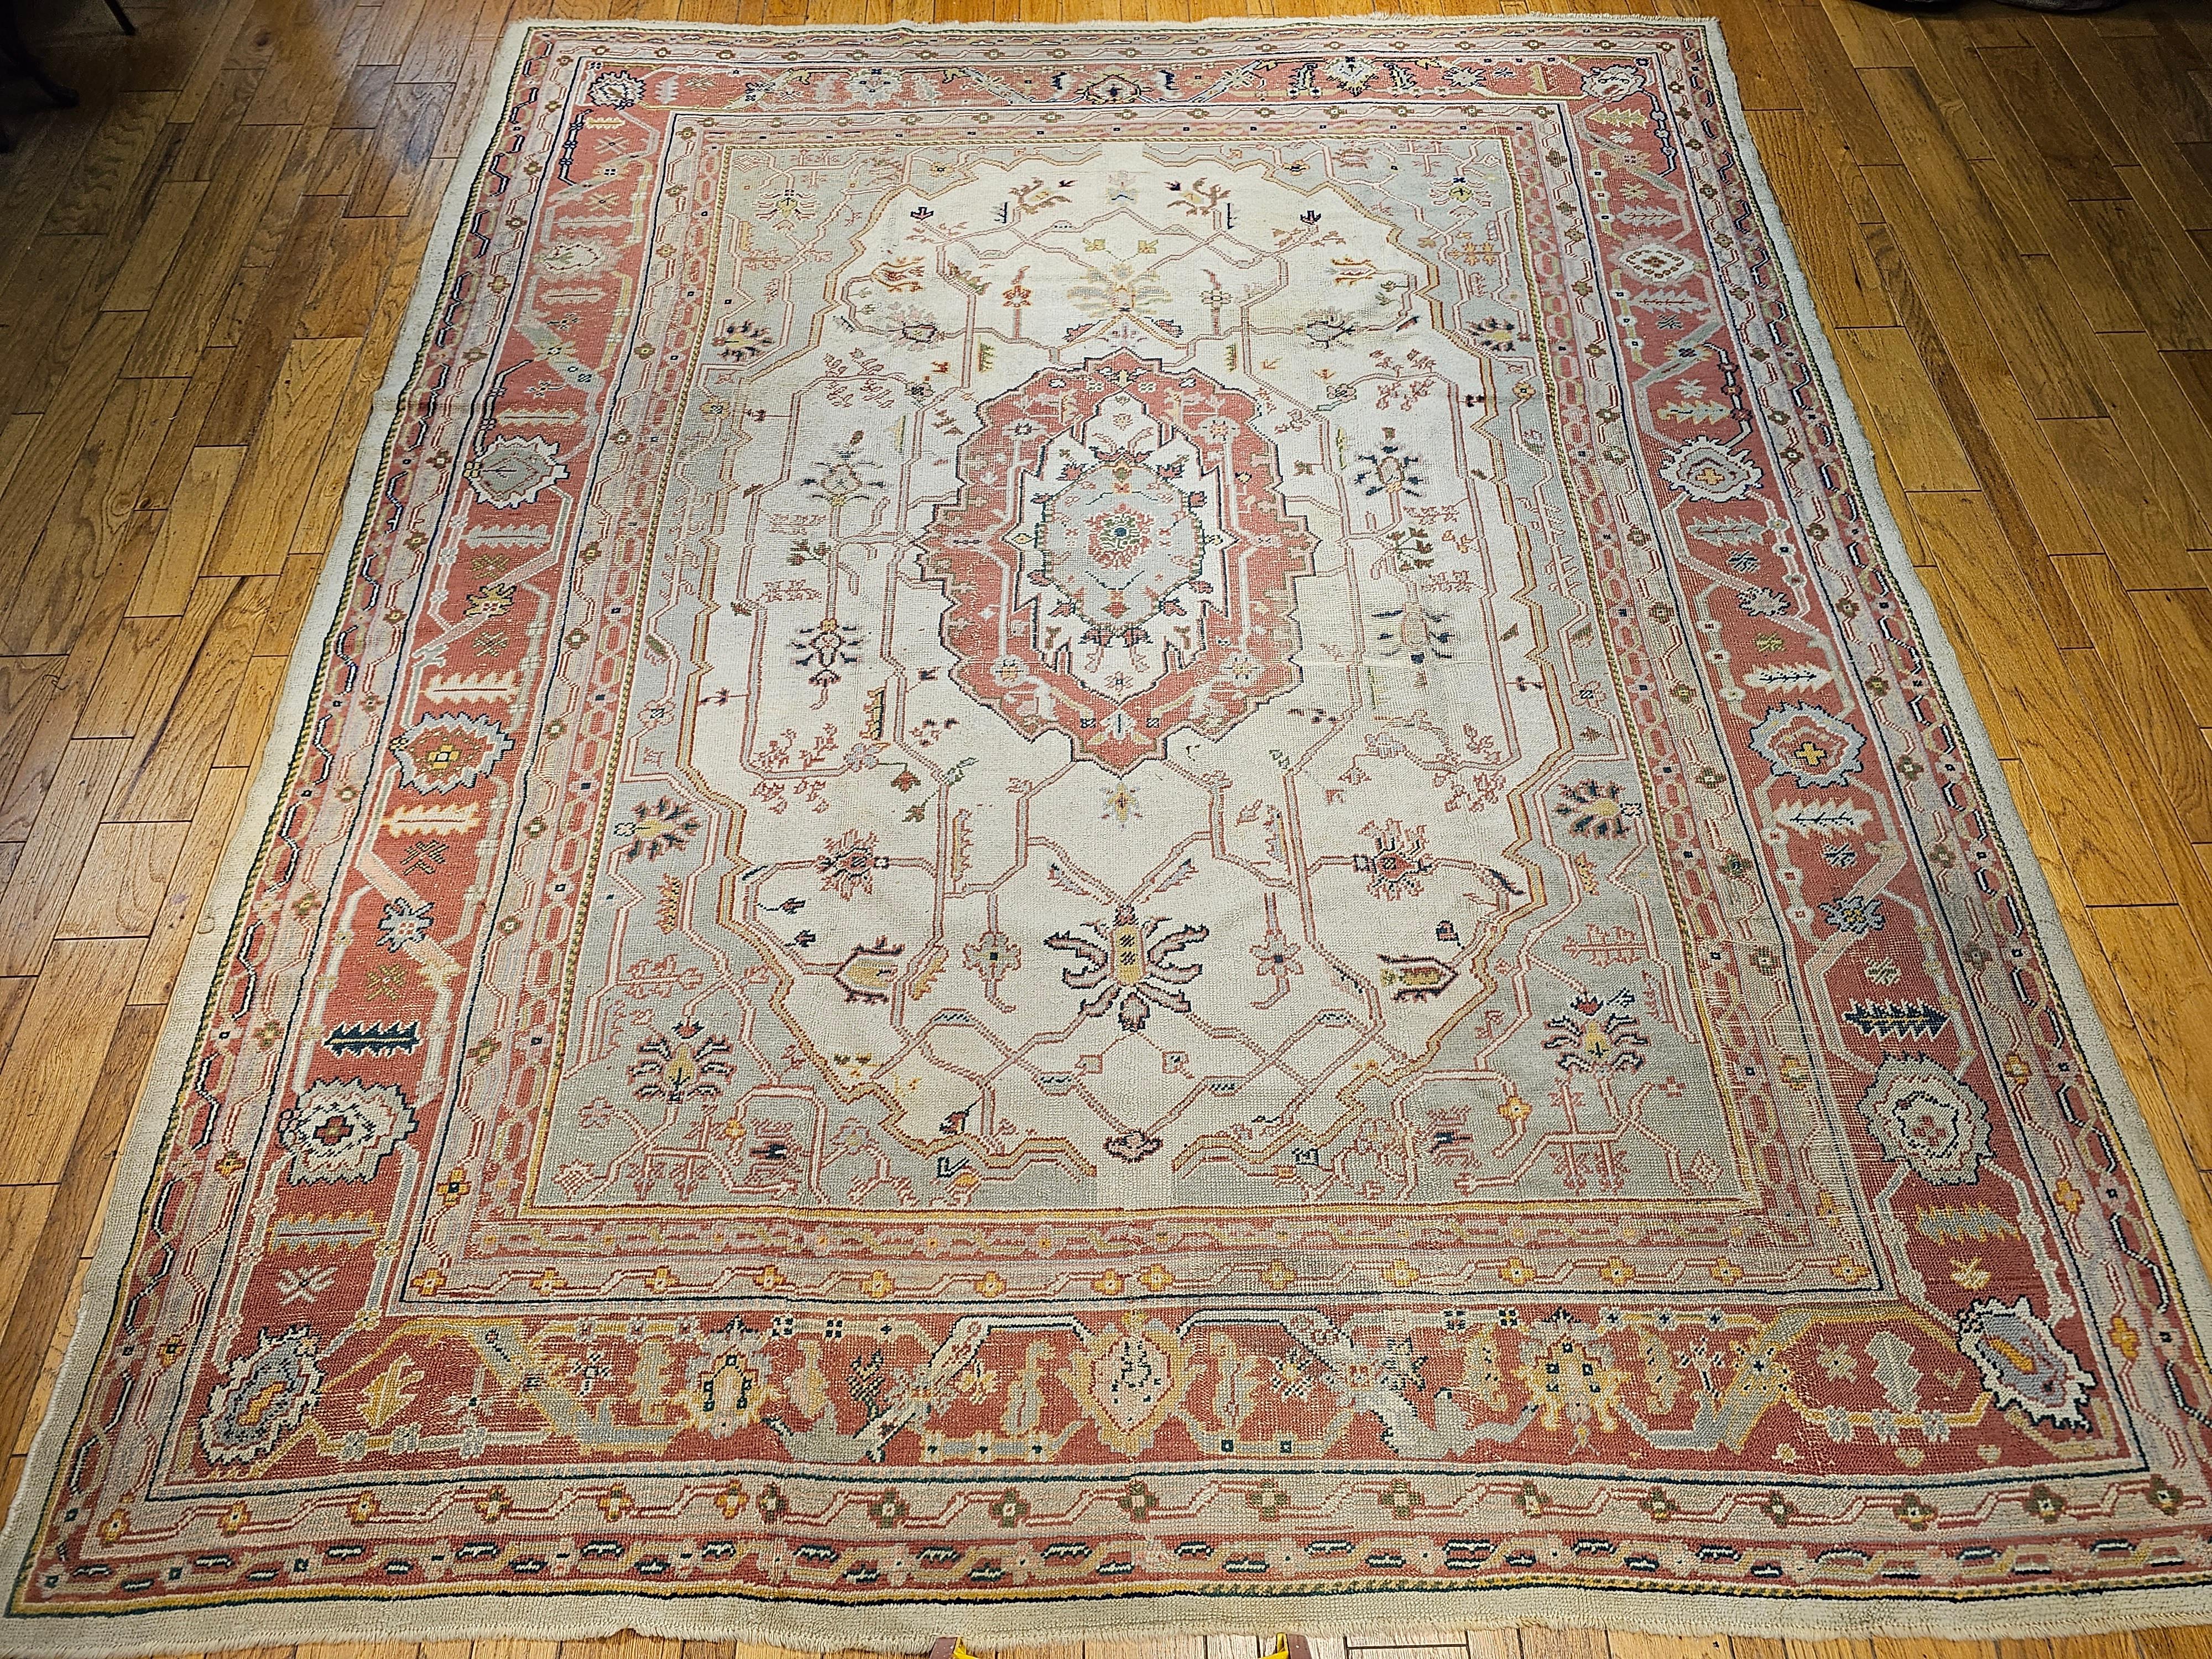 A “near square” oversized Turkish Oushak in a geometric medallion pattern from the early 1900s in soft shades of pink, green, yellow, and ivory.  It is in the style of the Persian Serapi rugs from the mid-1800s.  It has an open design set in a cream